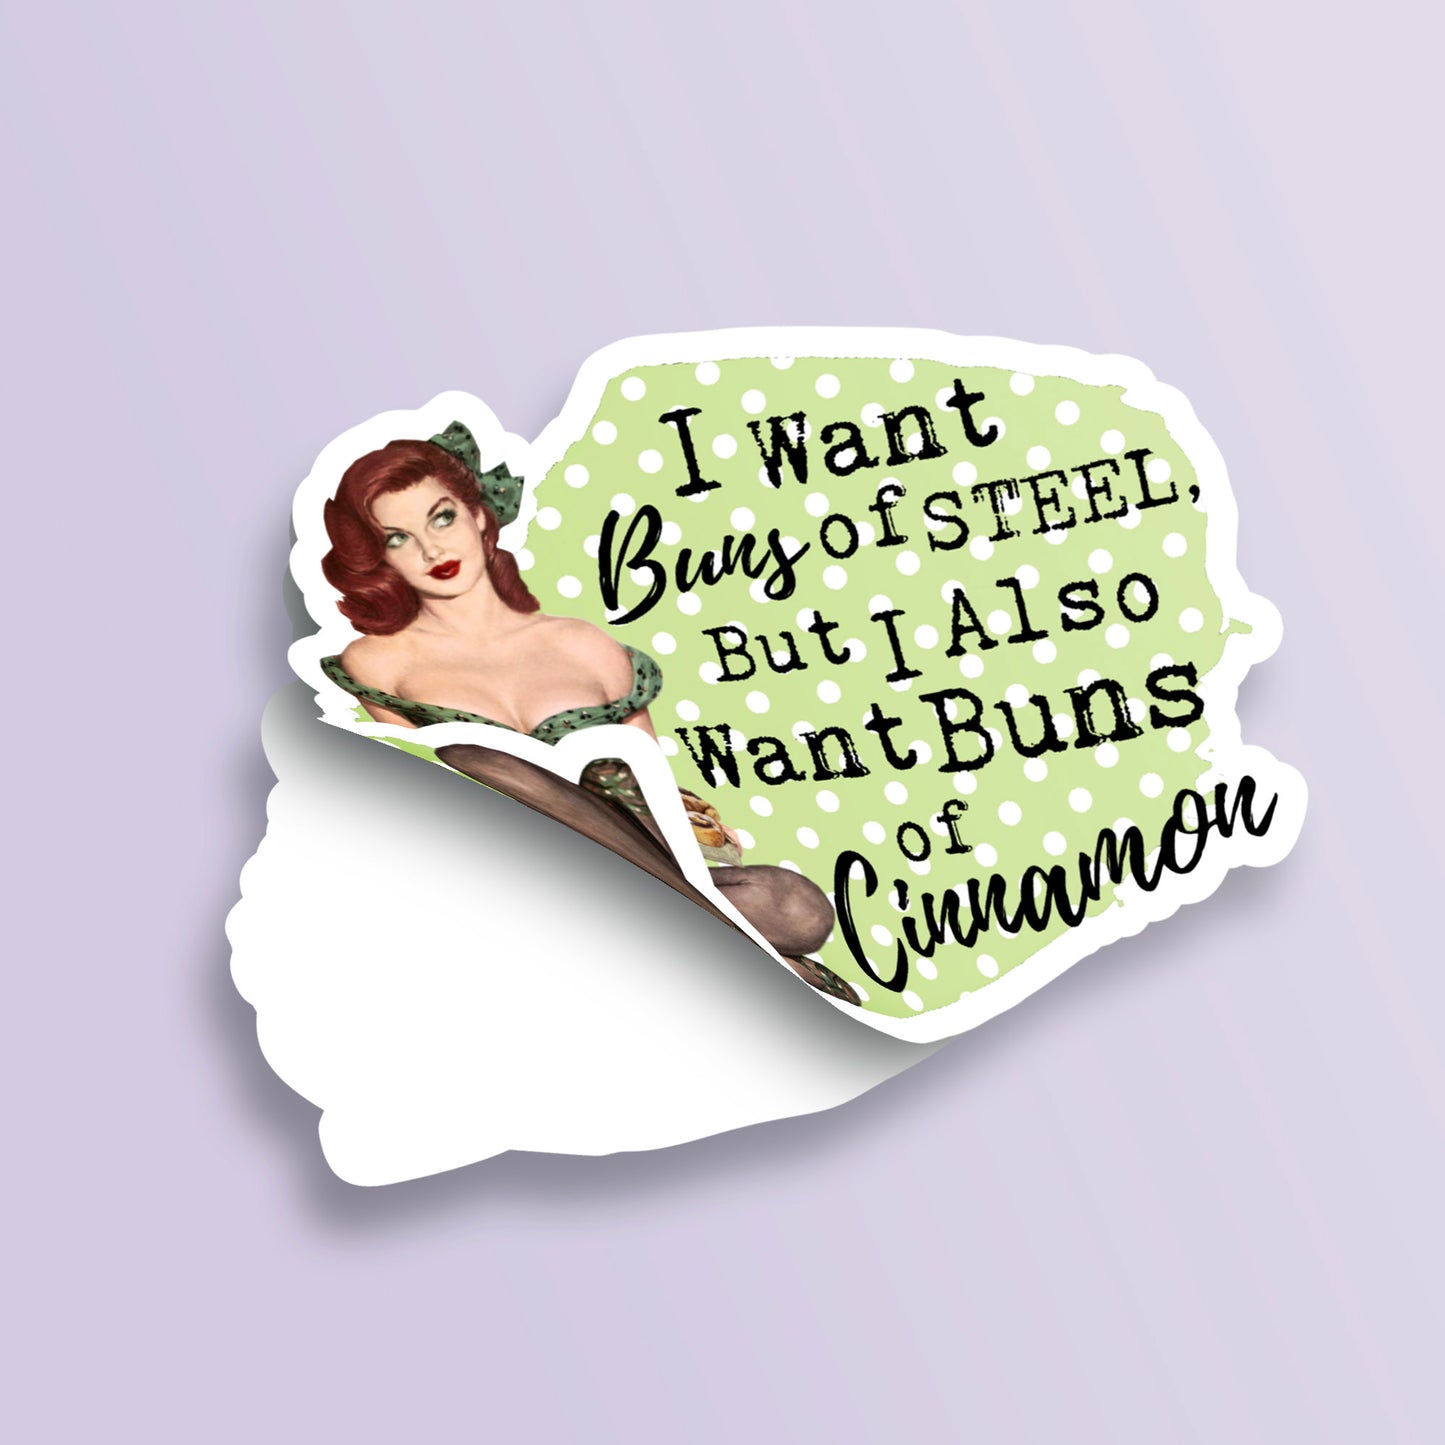 I Want Buns Of Steel But I Also Want Buns Of Cinnamon